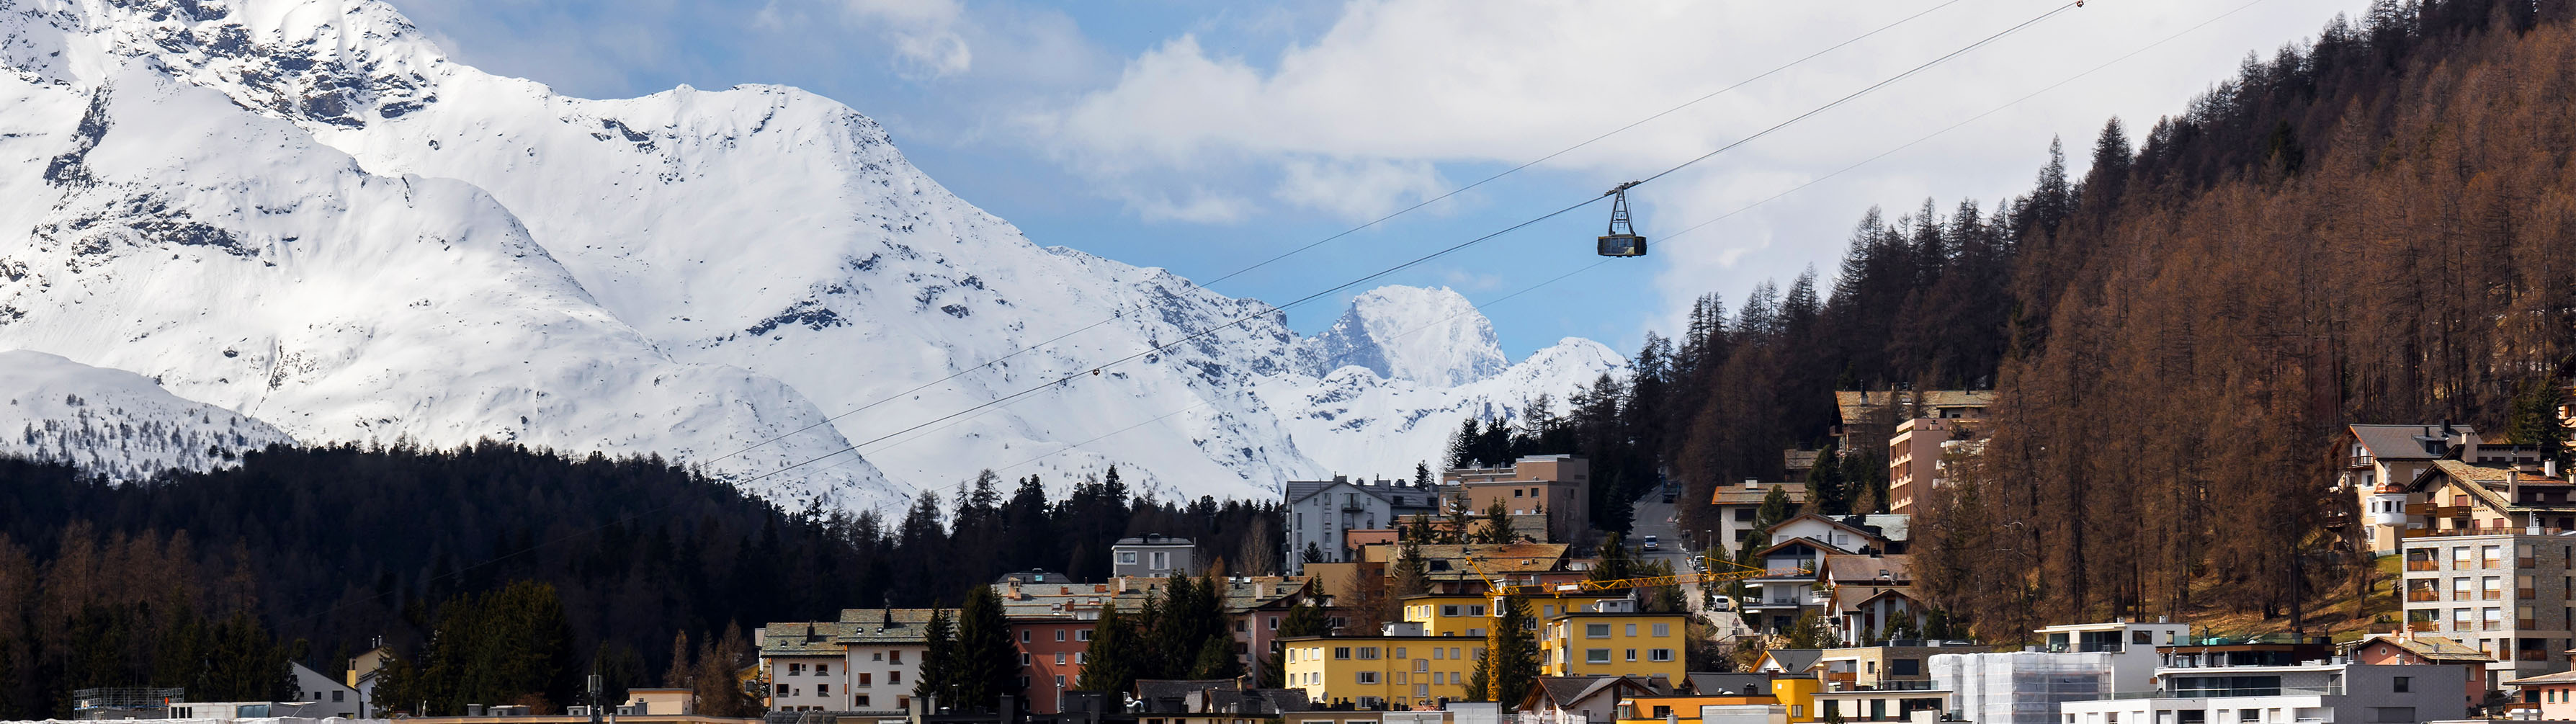 A cable car passes over the colorful houses of Saalbach, with snow capped peaks in the distance.